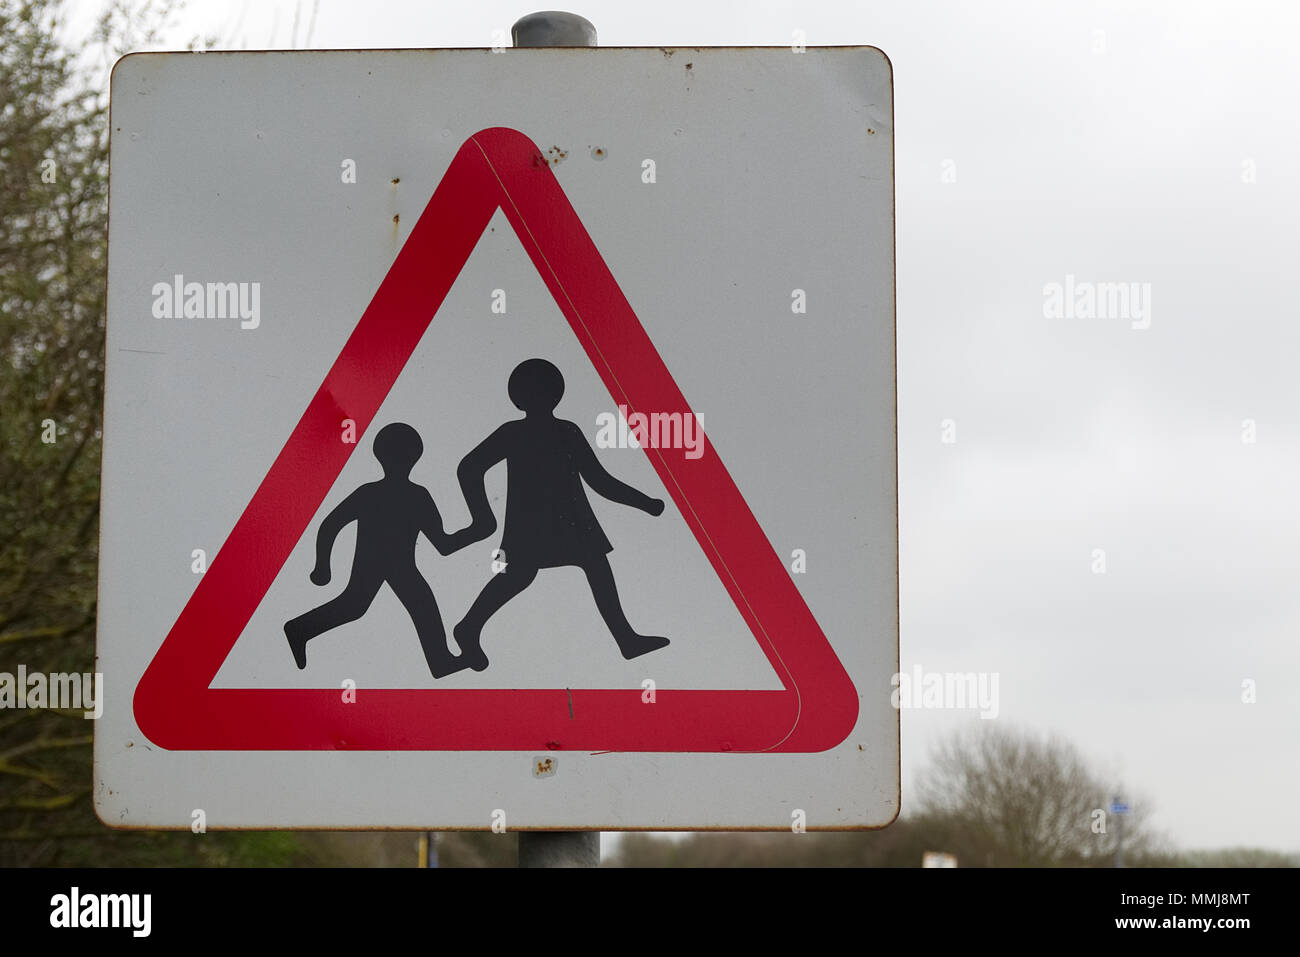 Old, weathered, red and white triangular road safety sign children school crossing pedestrians safely Stock Photo